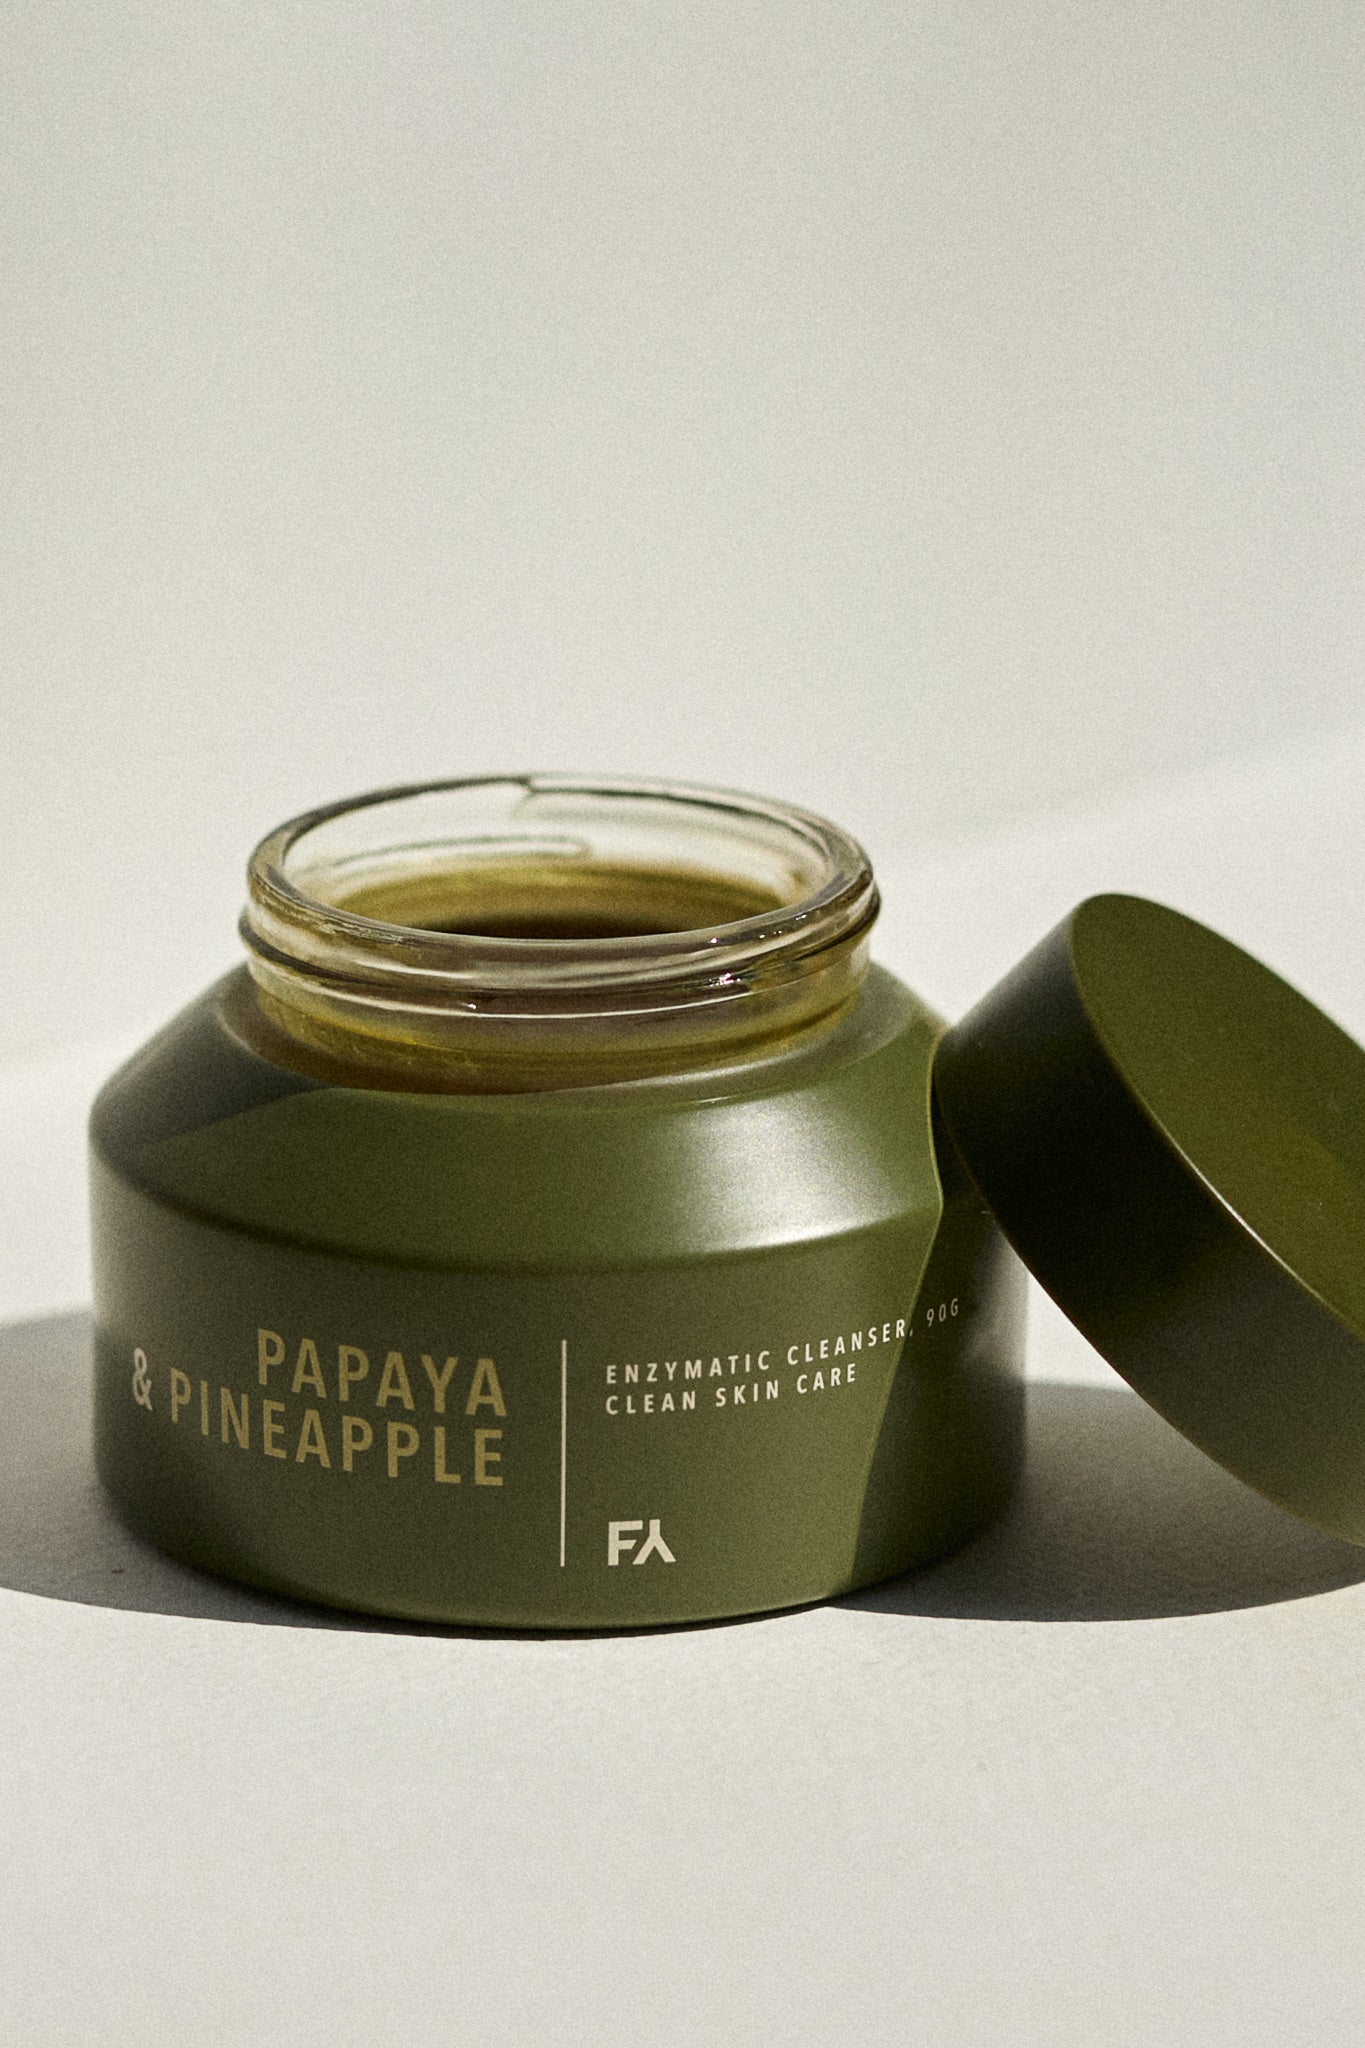 Picture of the Papaya & Pineapple Enzymatic Cleanser by Fields of Yarrow product jar with the lid opened